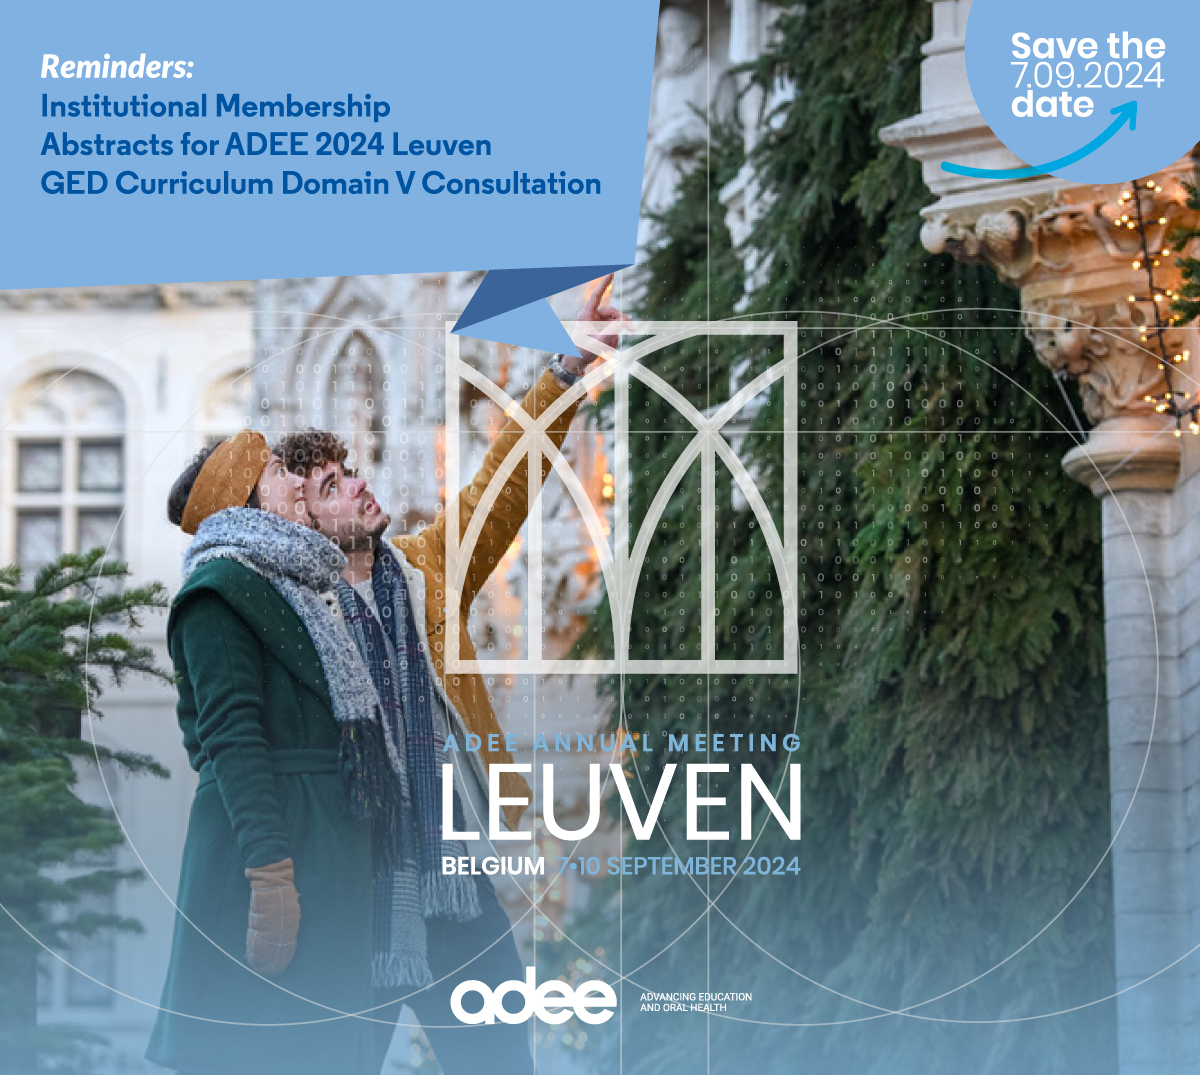 Our February Newsletter is available for consultation: adee.org/february-2024. Reminders for: Institutional Membership, Abstracts for ADEE 2024 Leuven, GED Curriculum Consultation. Participate, shape the future of dental education together! #Adee #Leuven2024 #AdeeAnnualMeeting